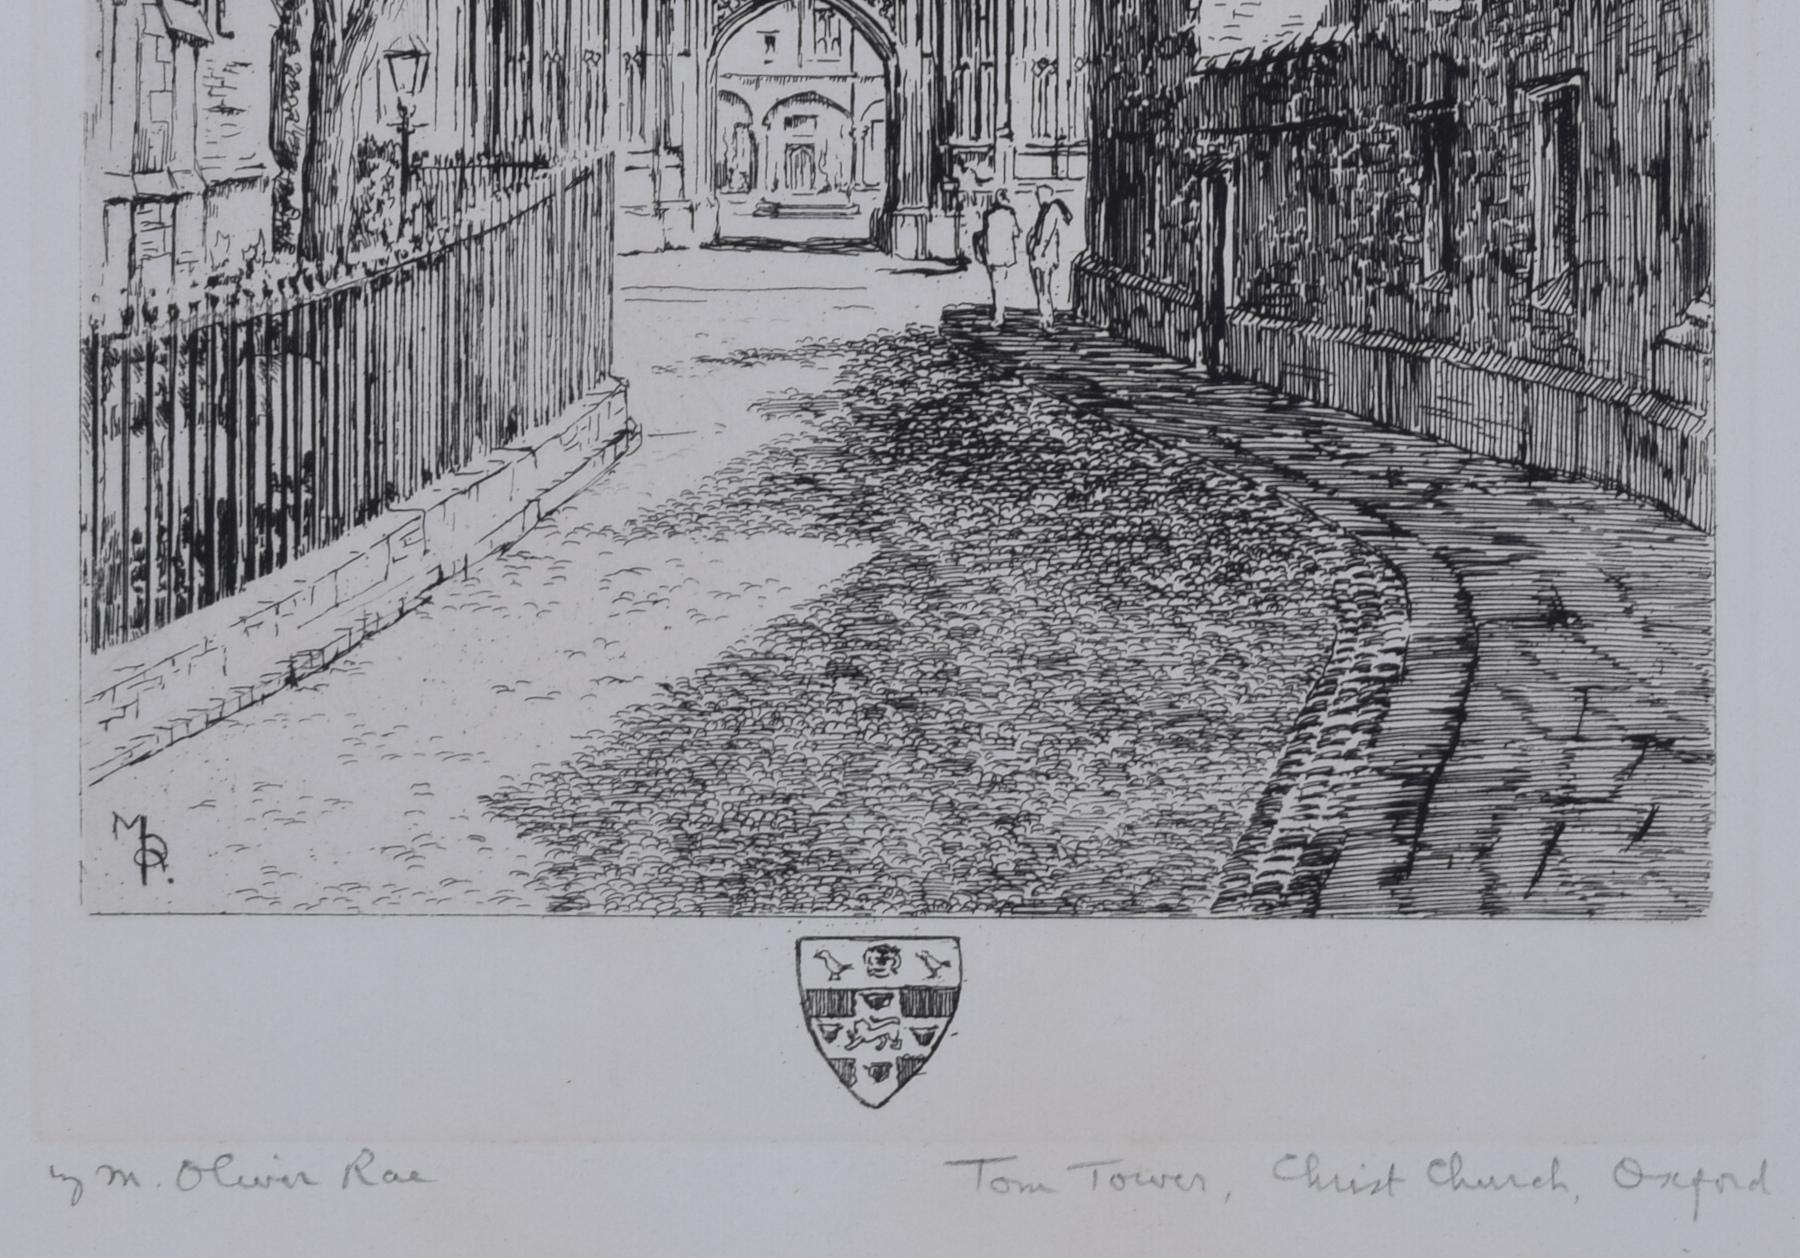 Tom Tower, Christ Church, Oxford etching by Mabel Oliver Rae For Sale 4